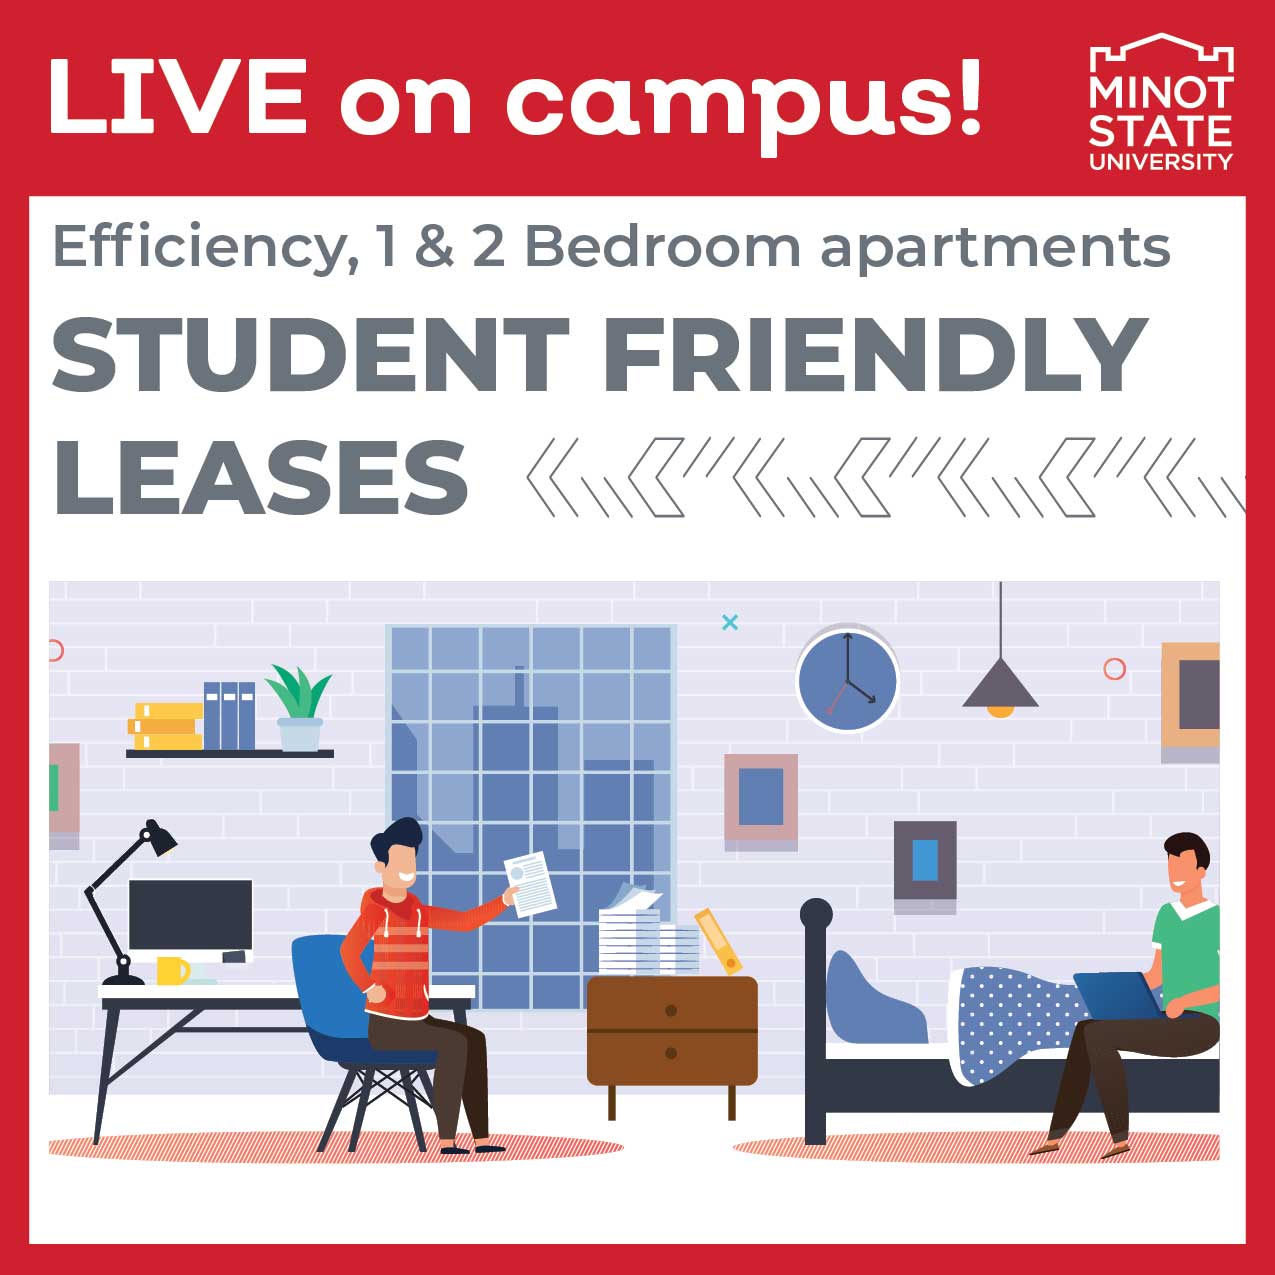 LIVE-student-friendly-leases.jpg